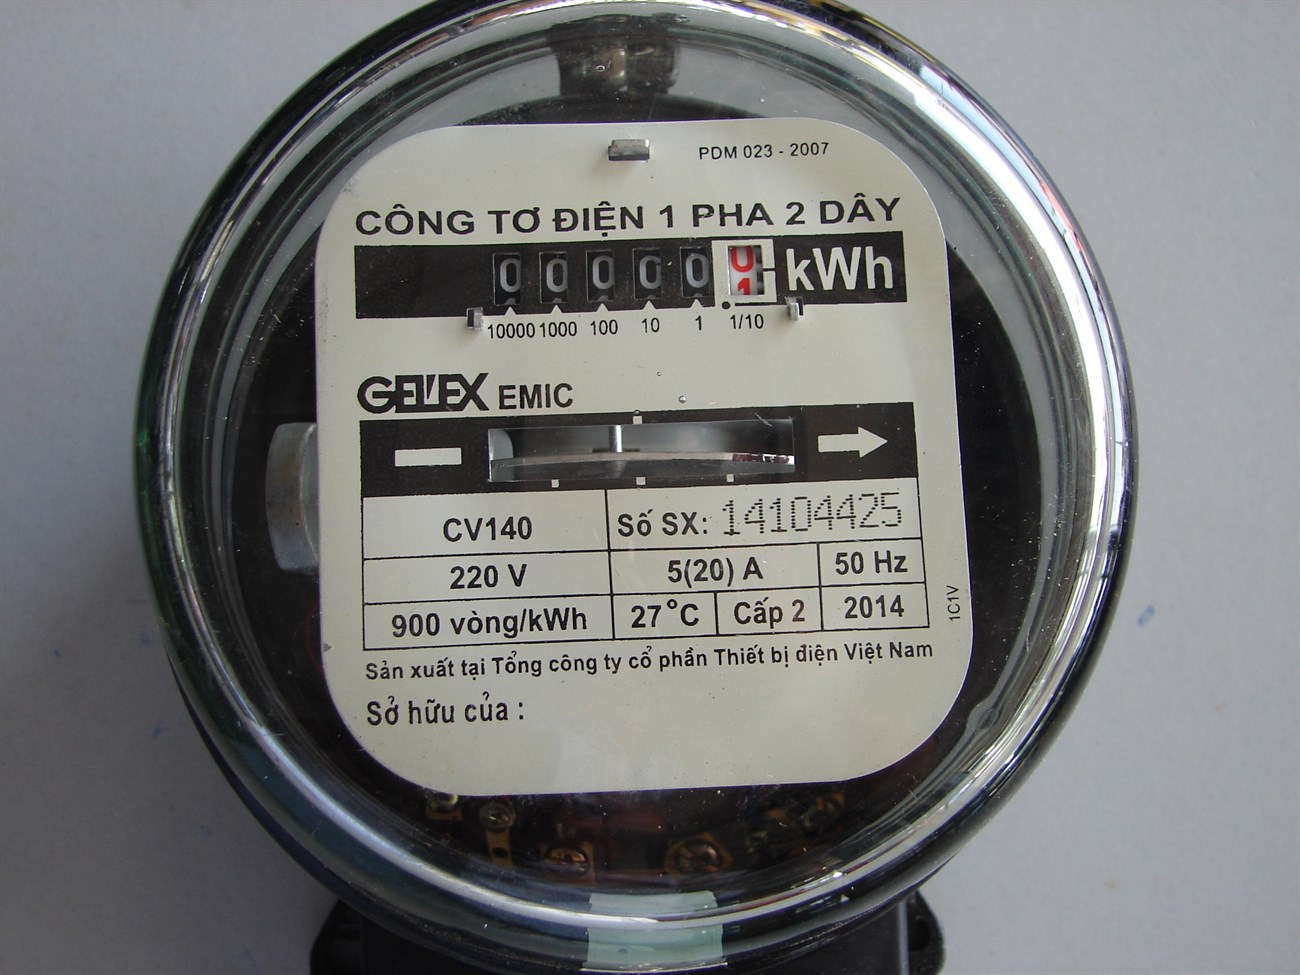 The parameters to know before checking the electricity meter